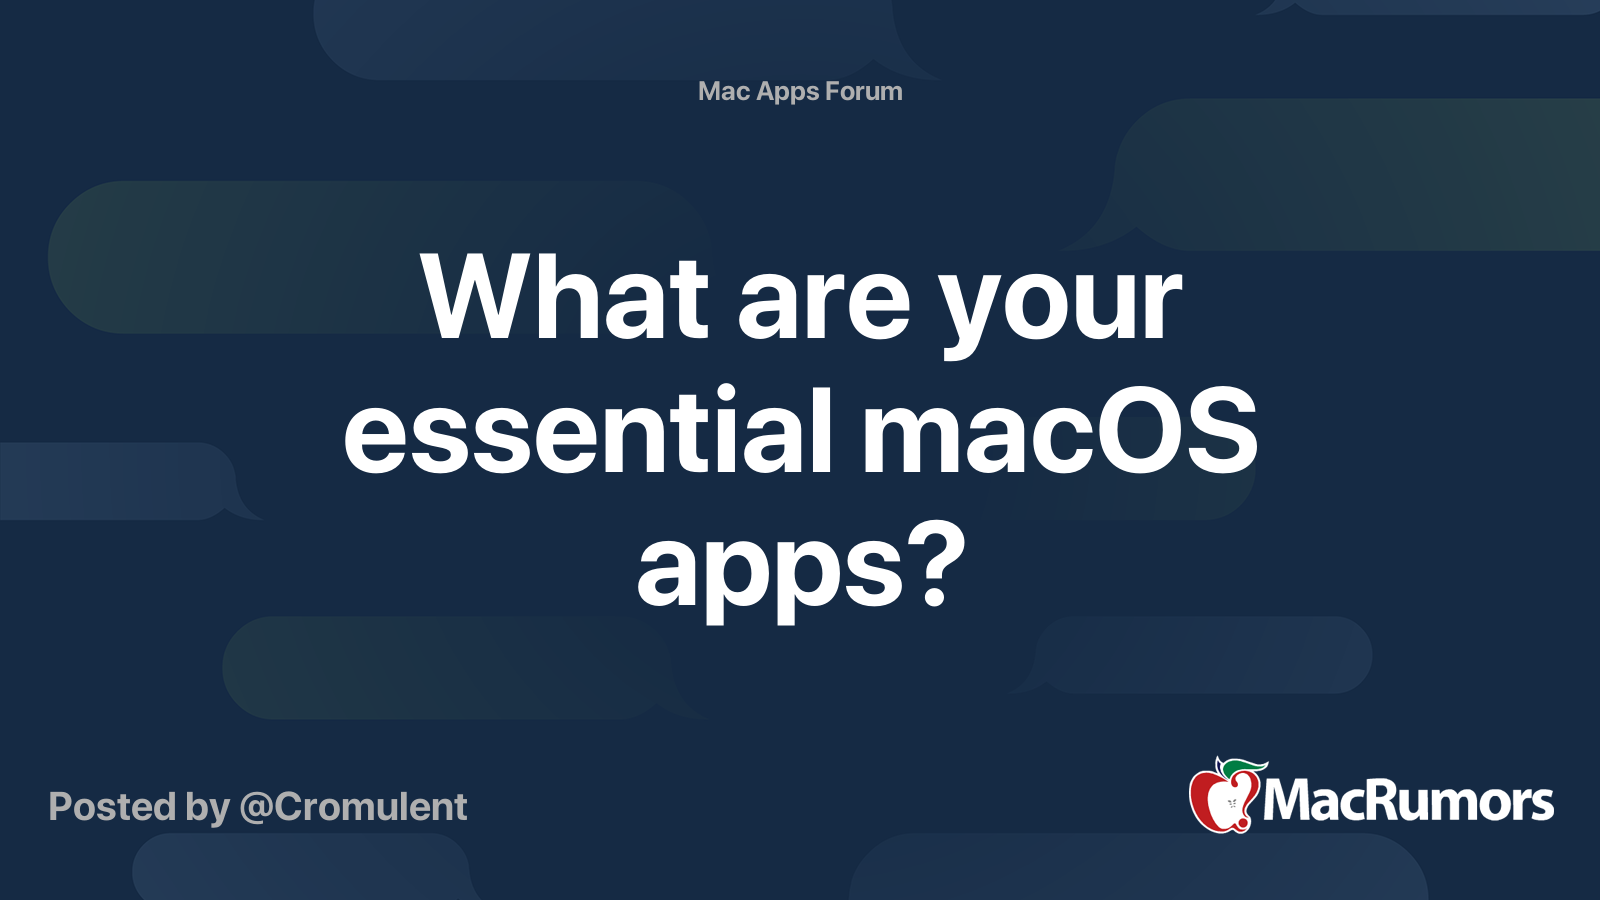 How many Mac Apps are You Sporting? / What is your #AppNum